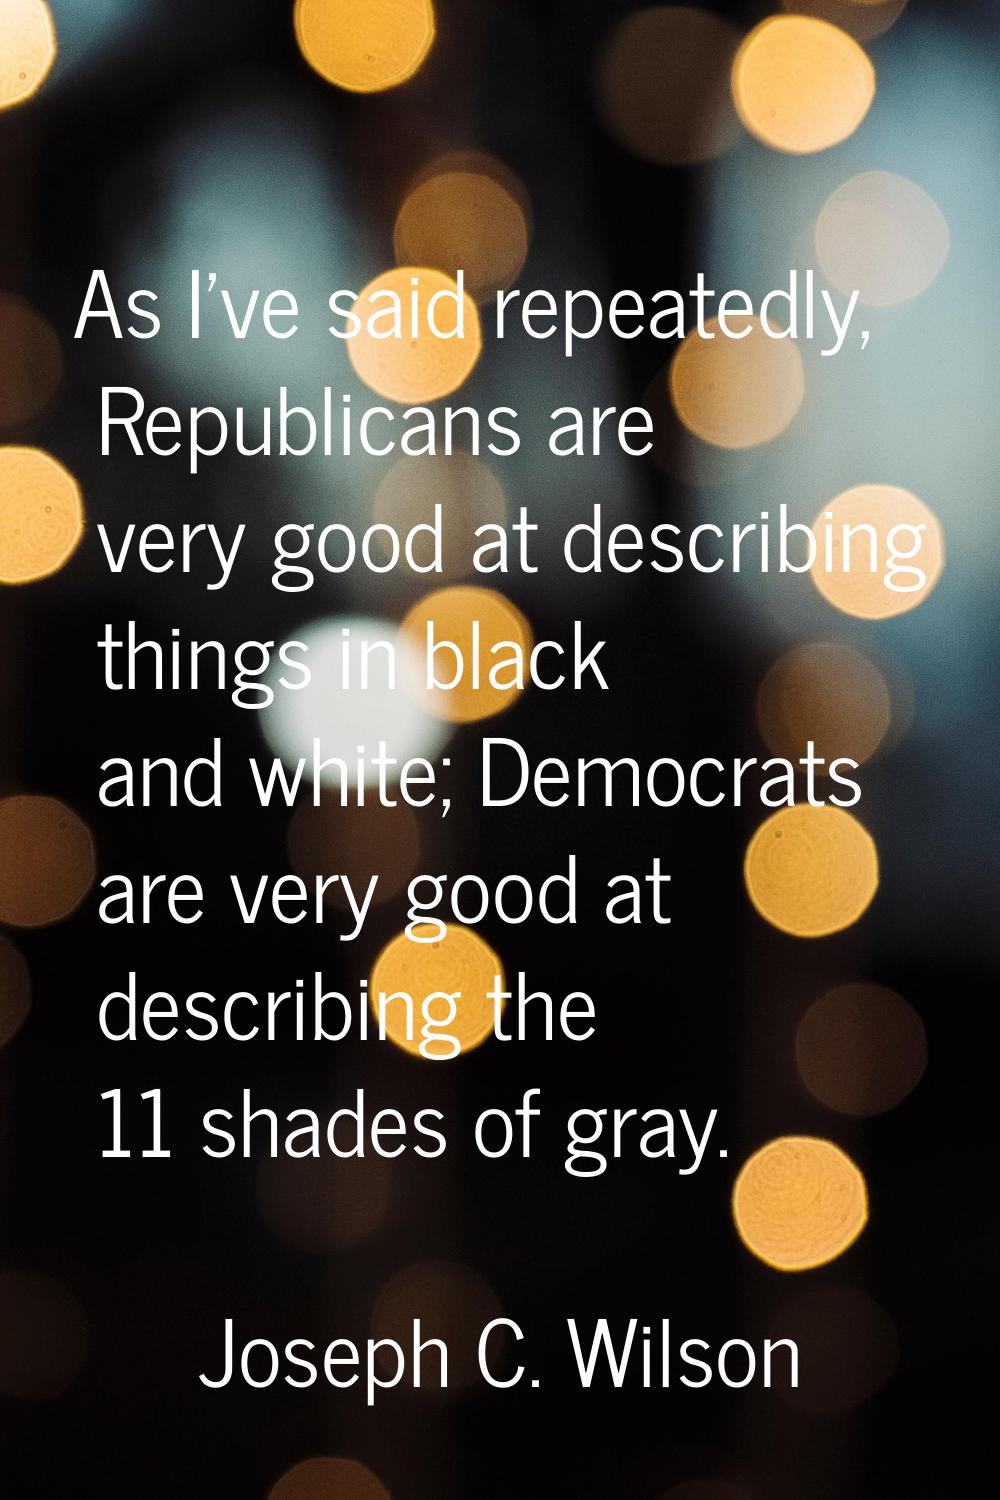 As I've said repeatedly, Republicans are very good at describing things in black and white; Democra